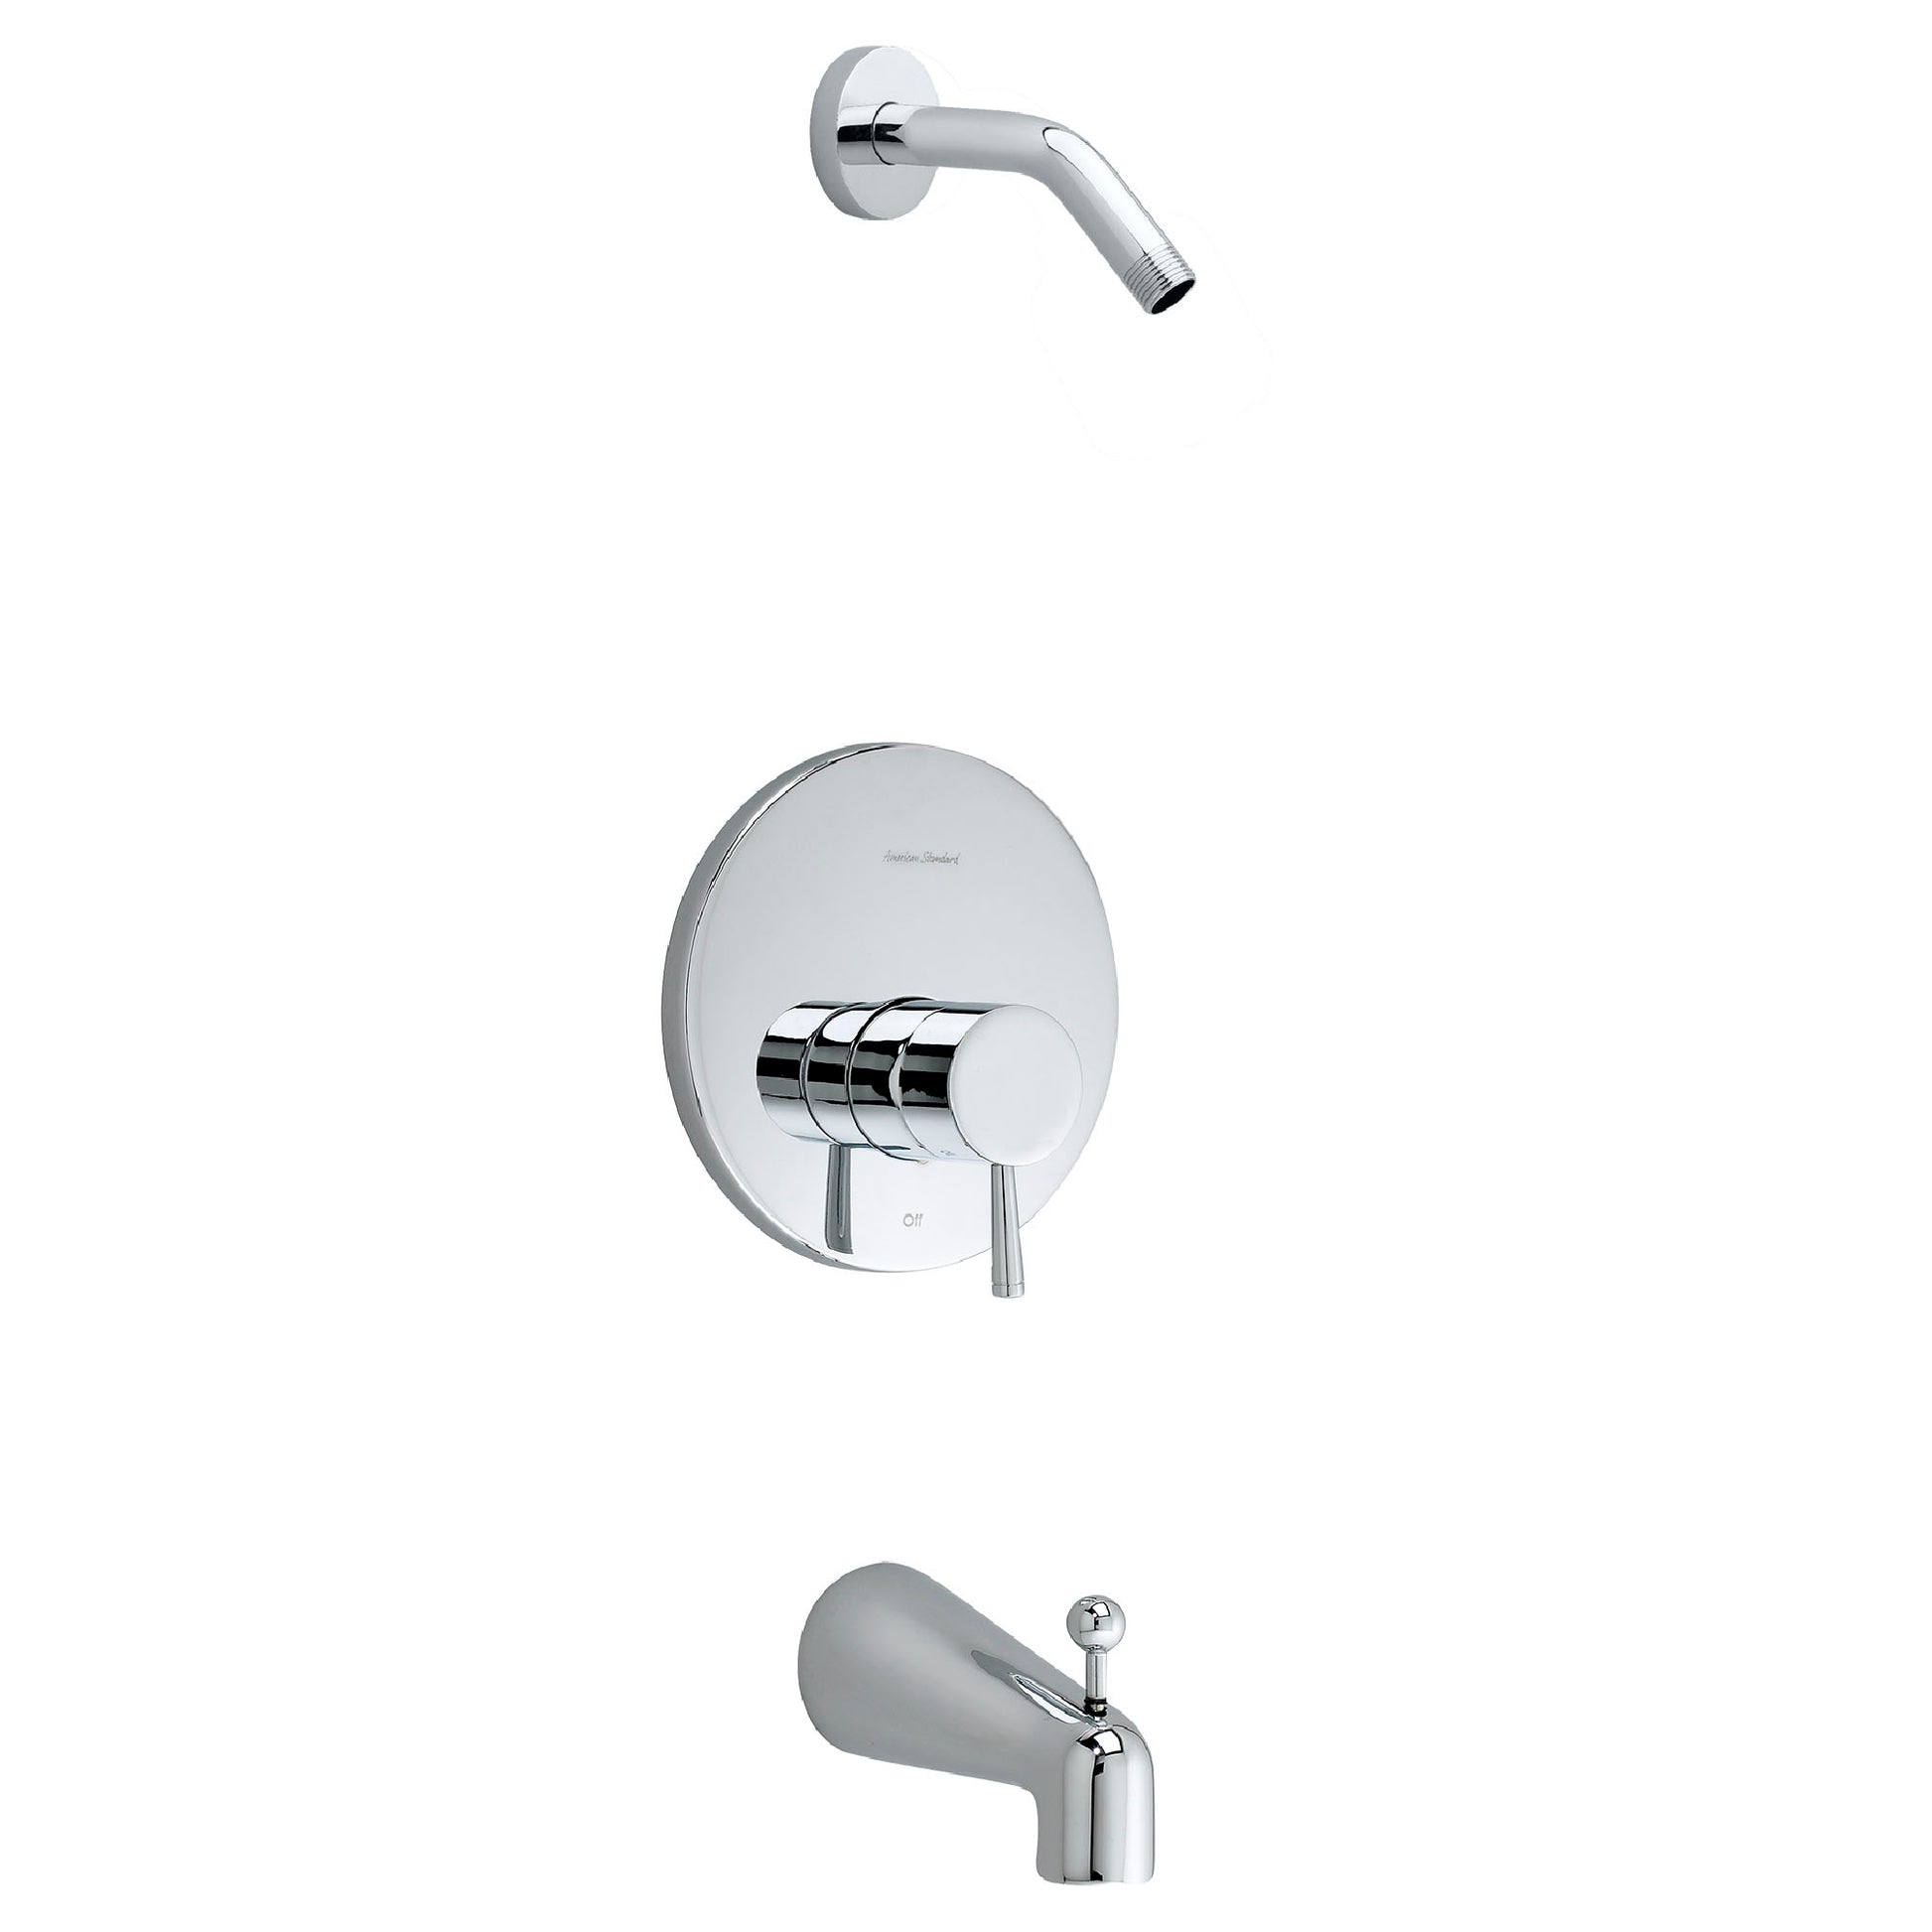 "SERIN" BATH SHOWER TRIM KIT WITH METAL LEVER HANDLE AND IPS DIVERTER TUB SPOUT WITH DECAL RING. LESS VALVE, LESS SHOWERHEAD, CHROME